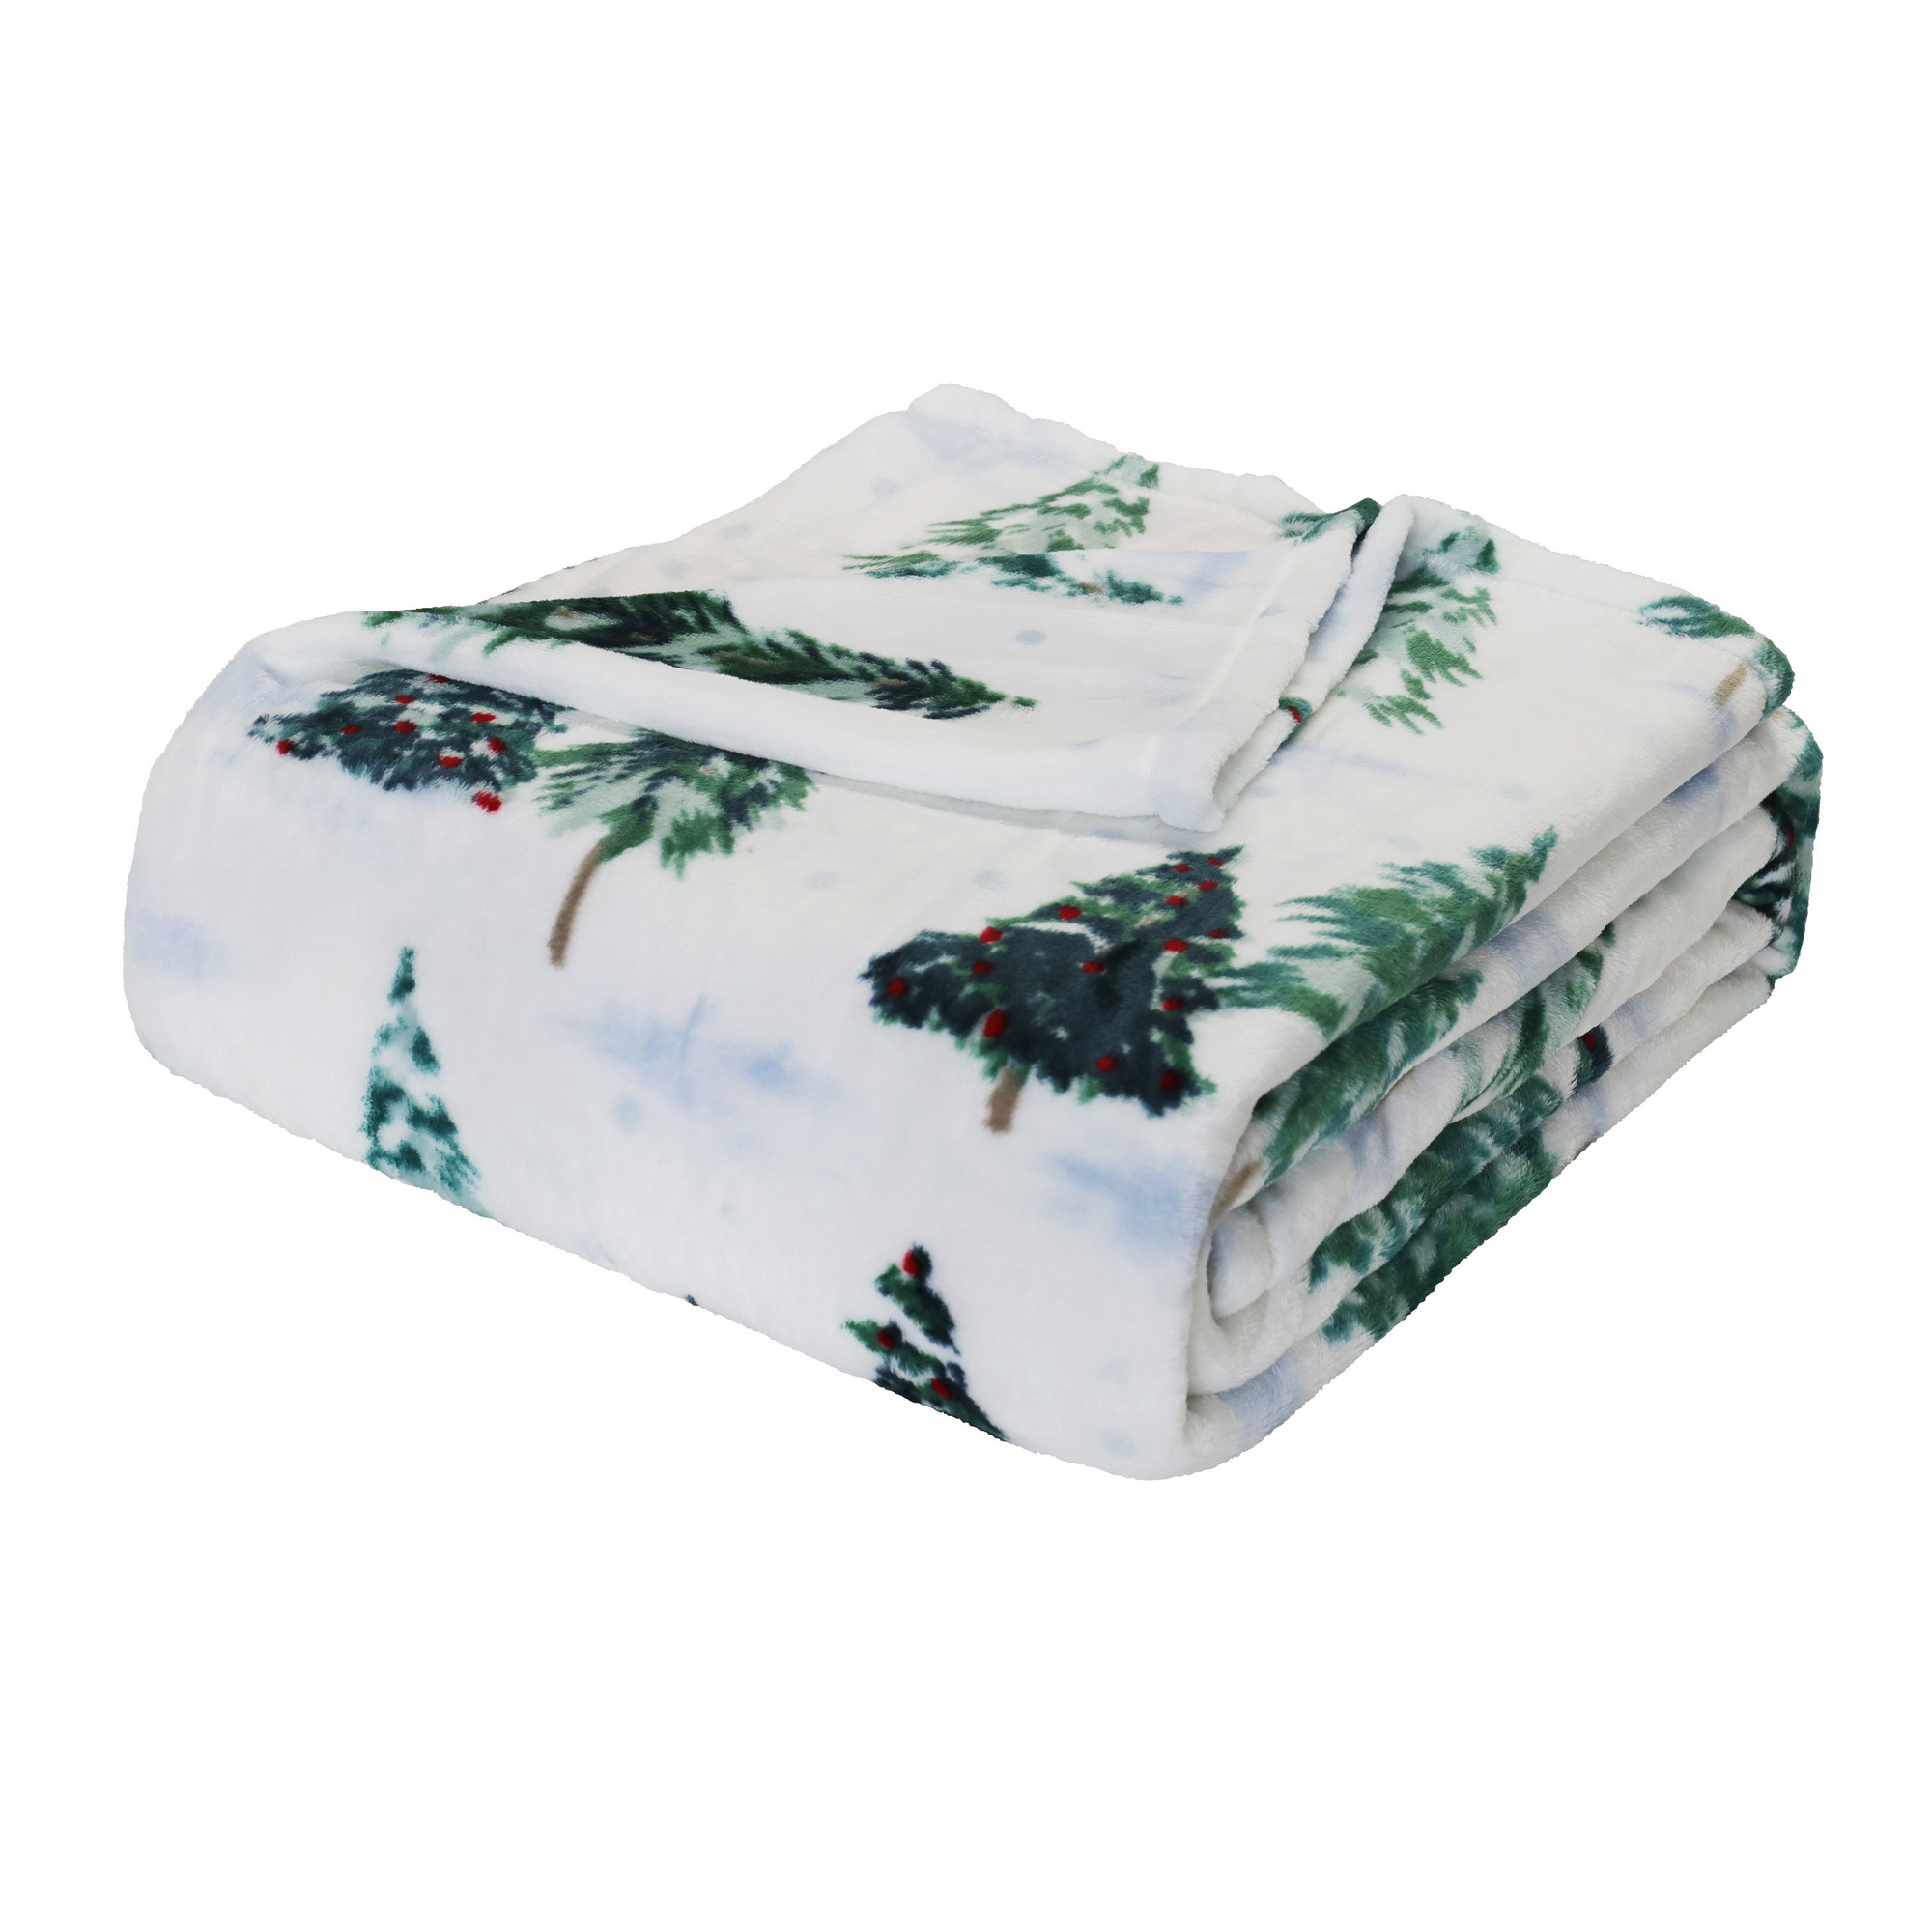 Mainstays Deluxe Plush Bed Holiday Blanket, Christmas Tree, Full/Queen - image 5 of 6